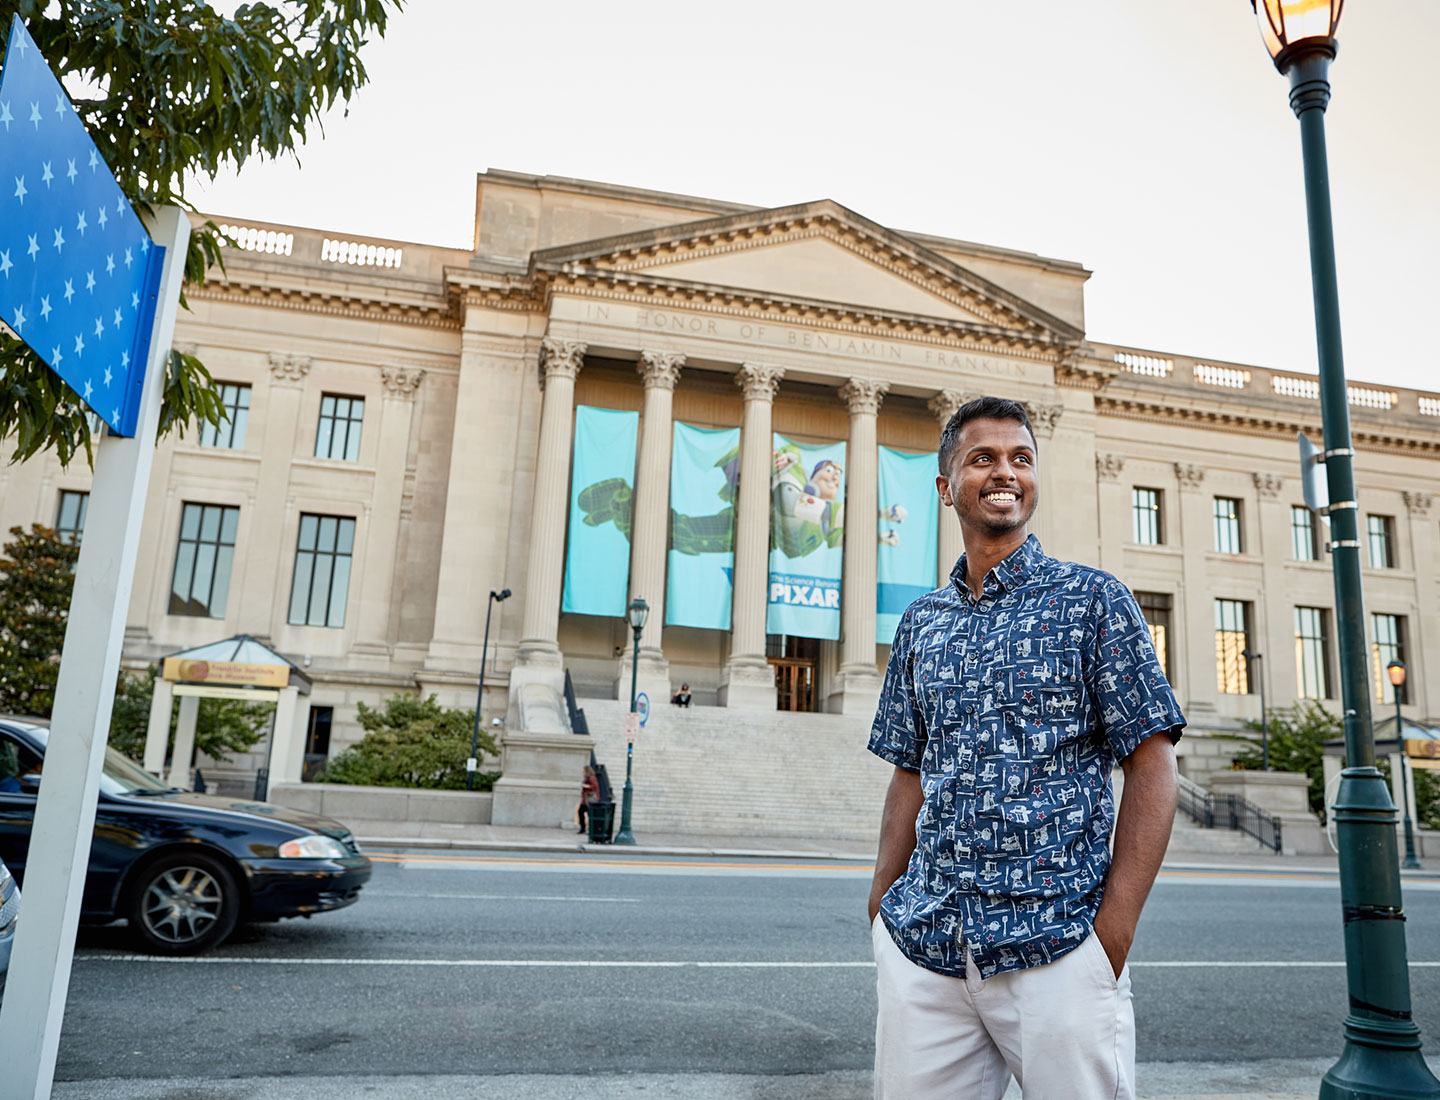 Dale Oommen, The College of New Jersey class of 2017, in front of the Franklin Institute in Philadelphia, PA. August, 2016.